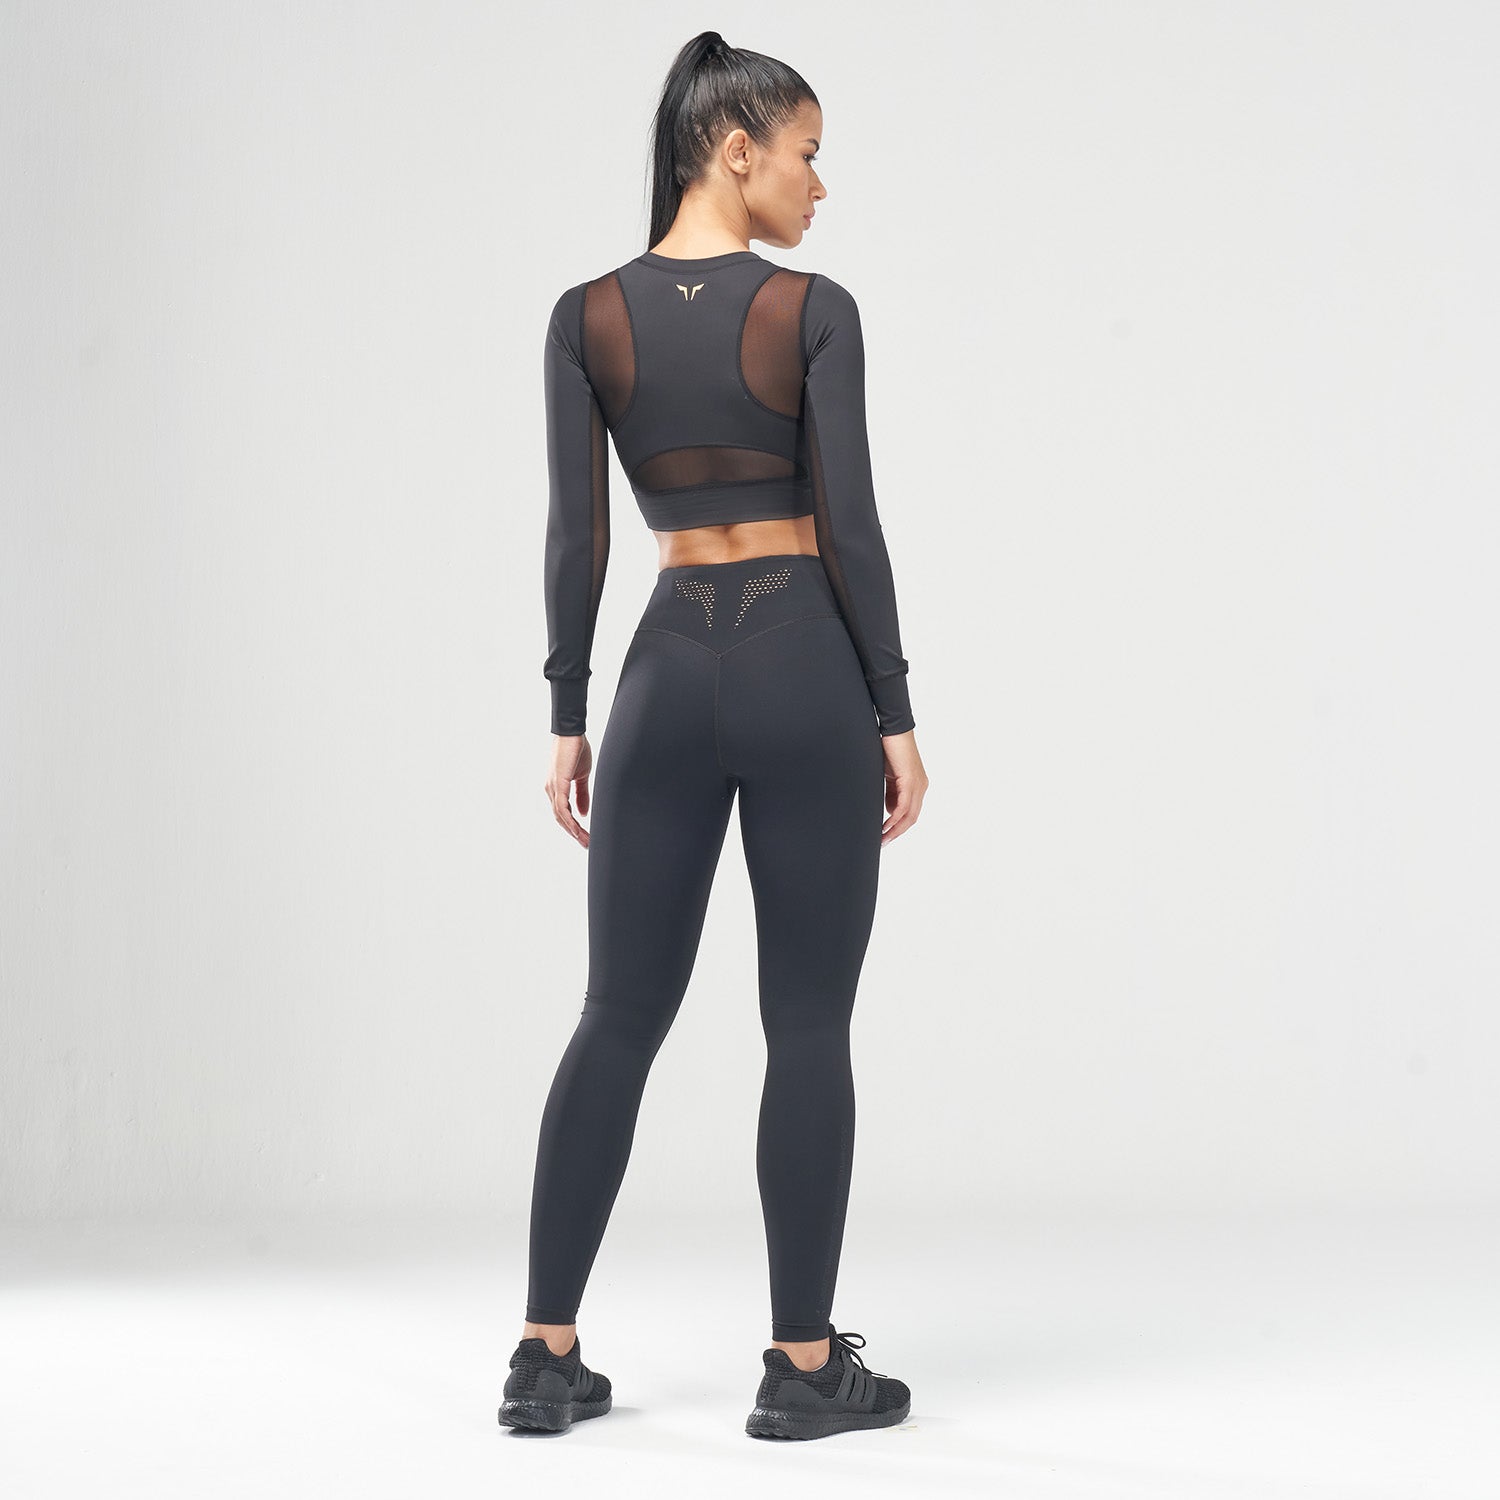 squatwolf-workout-clothes-code-run-the-city-leggings-black-gym-leggings-for-women